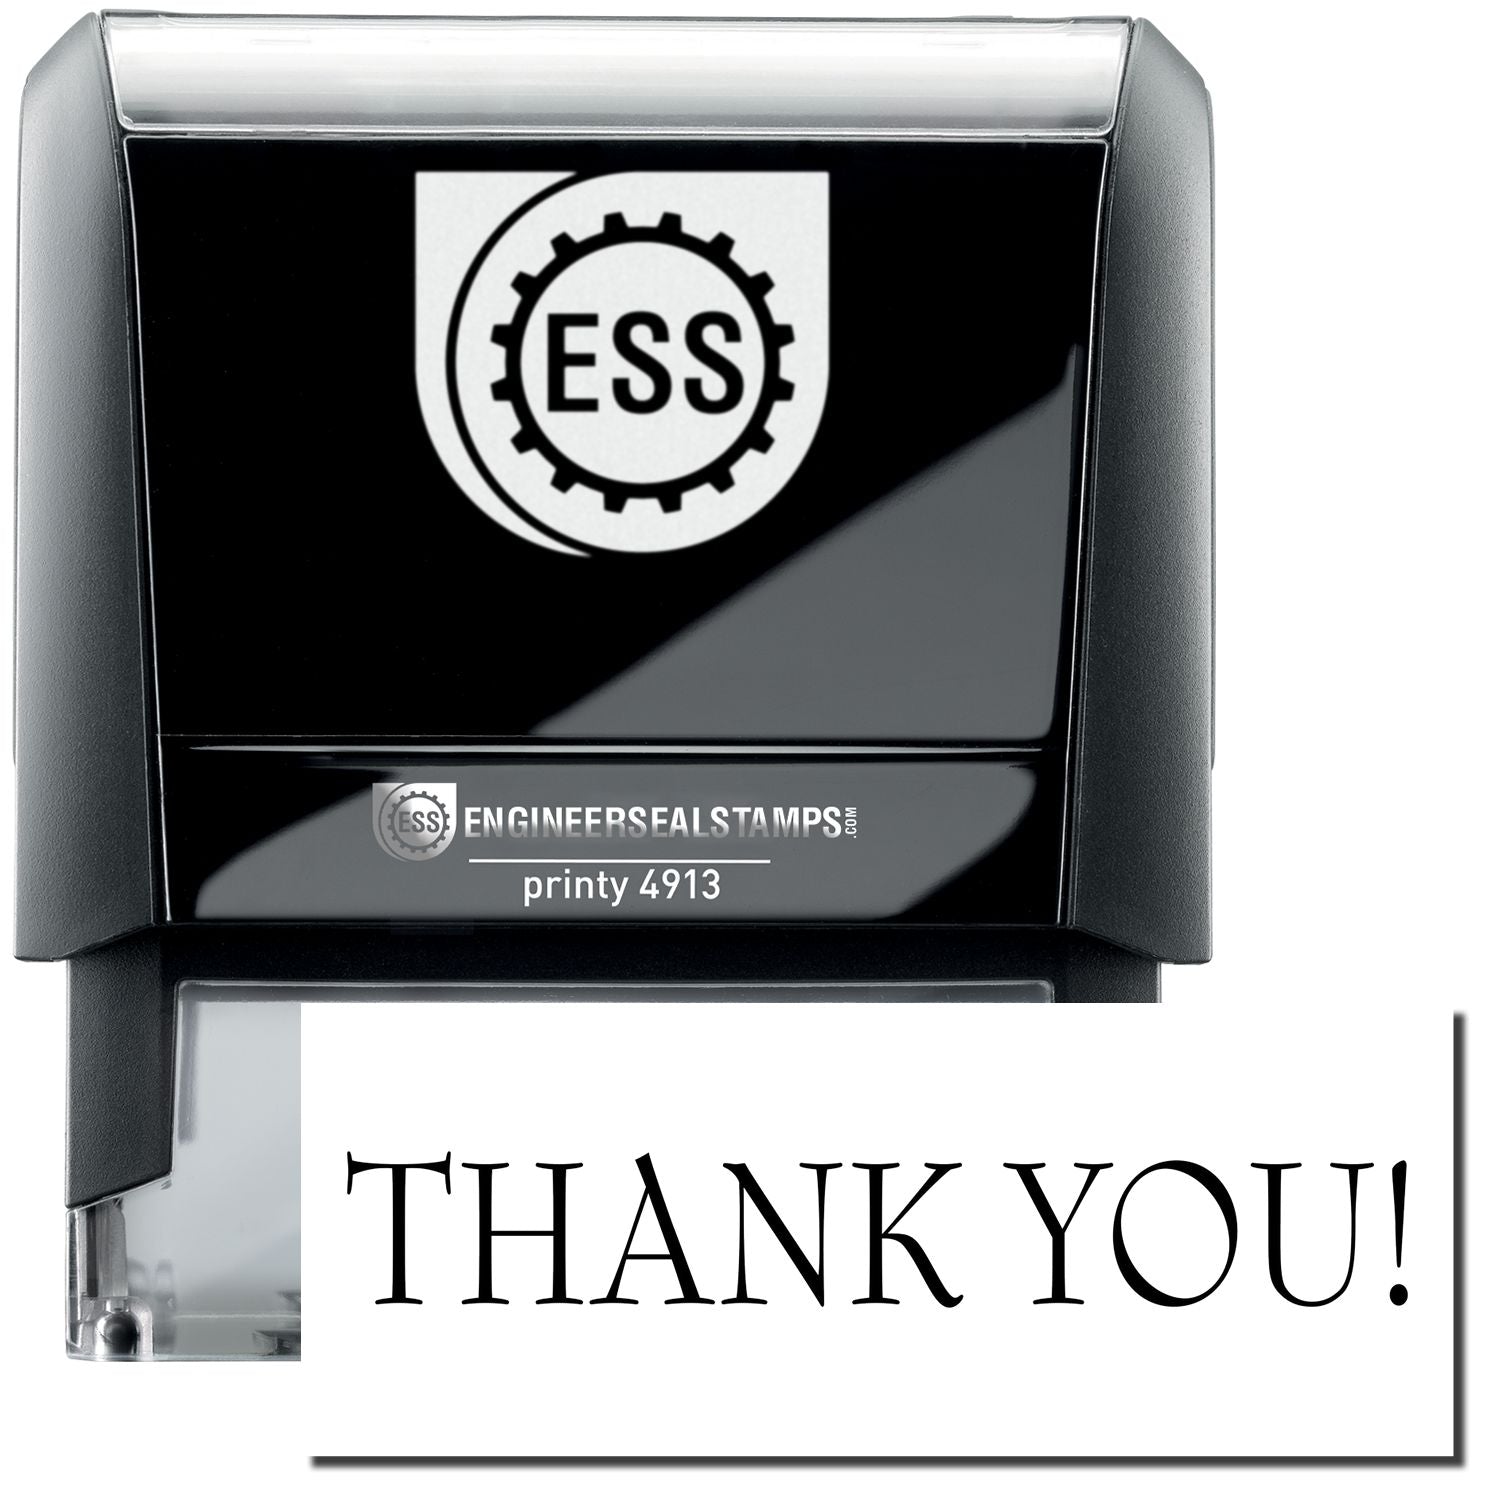 A self-inking stamp with a stamped image showing how the text "THANK YOU!" in a large font is displayed by it.